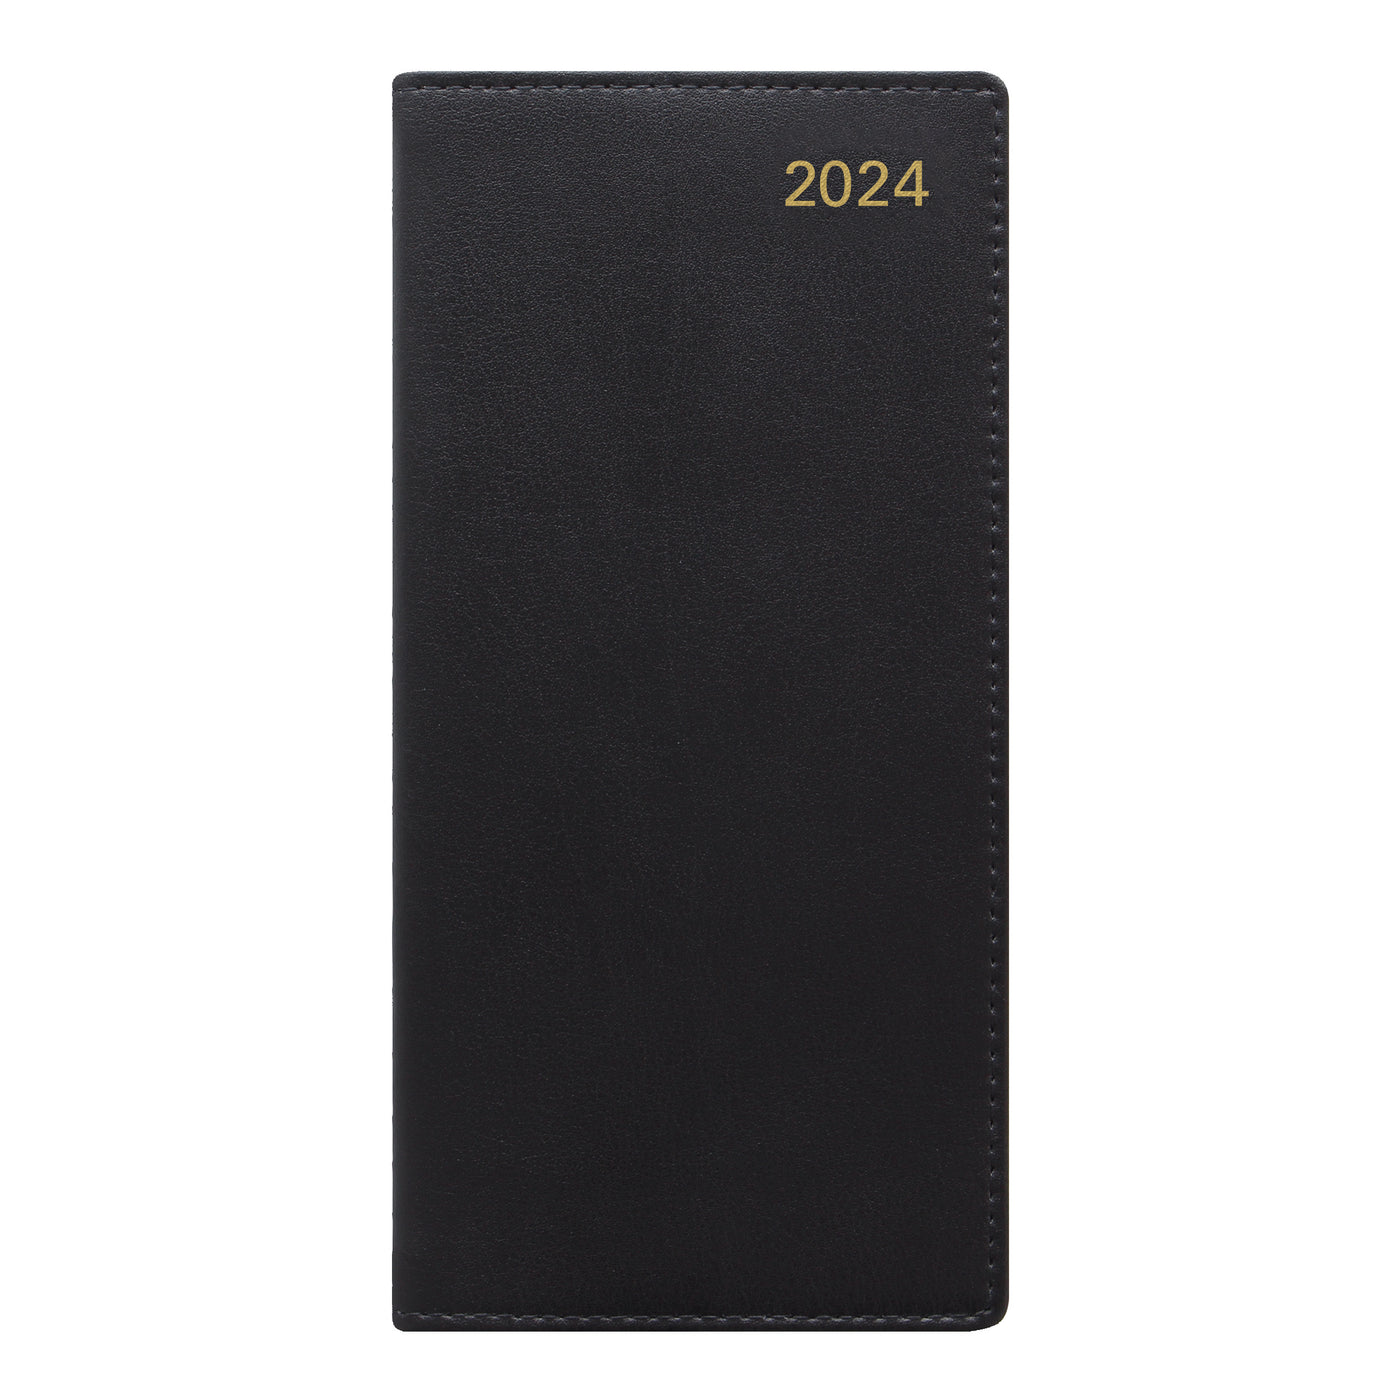 Letts Belgravia Slim Week to View Leather Diary with Planners - 6 3/4" x 3 1/4" - Black